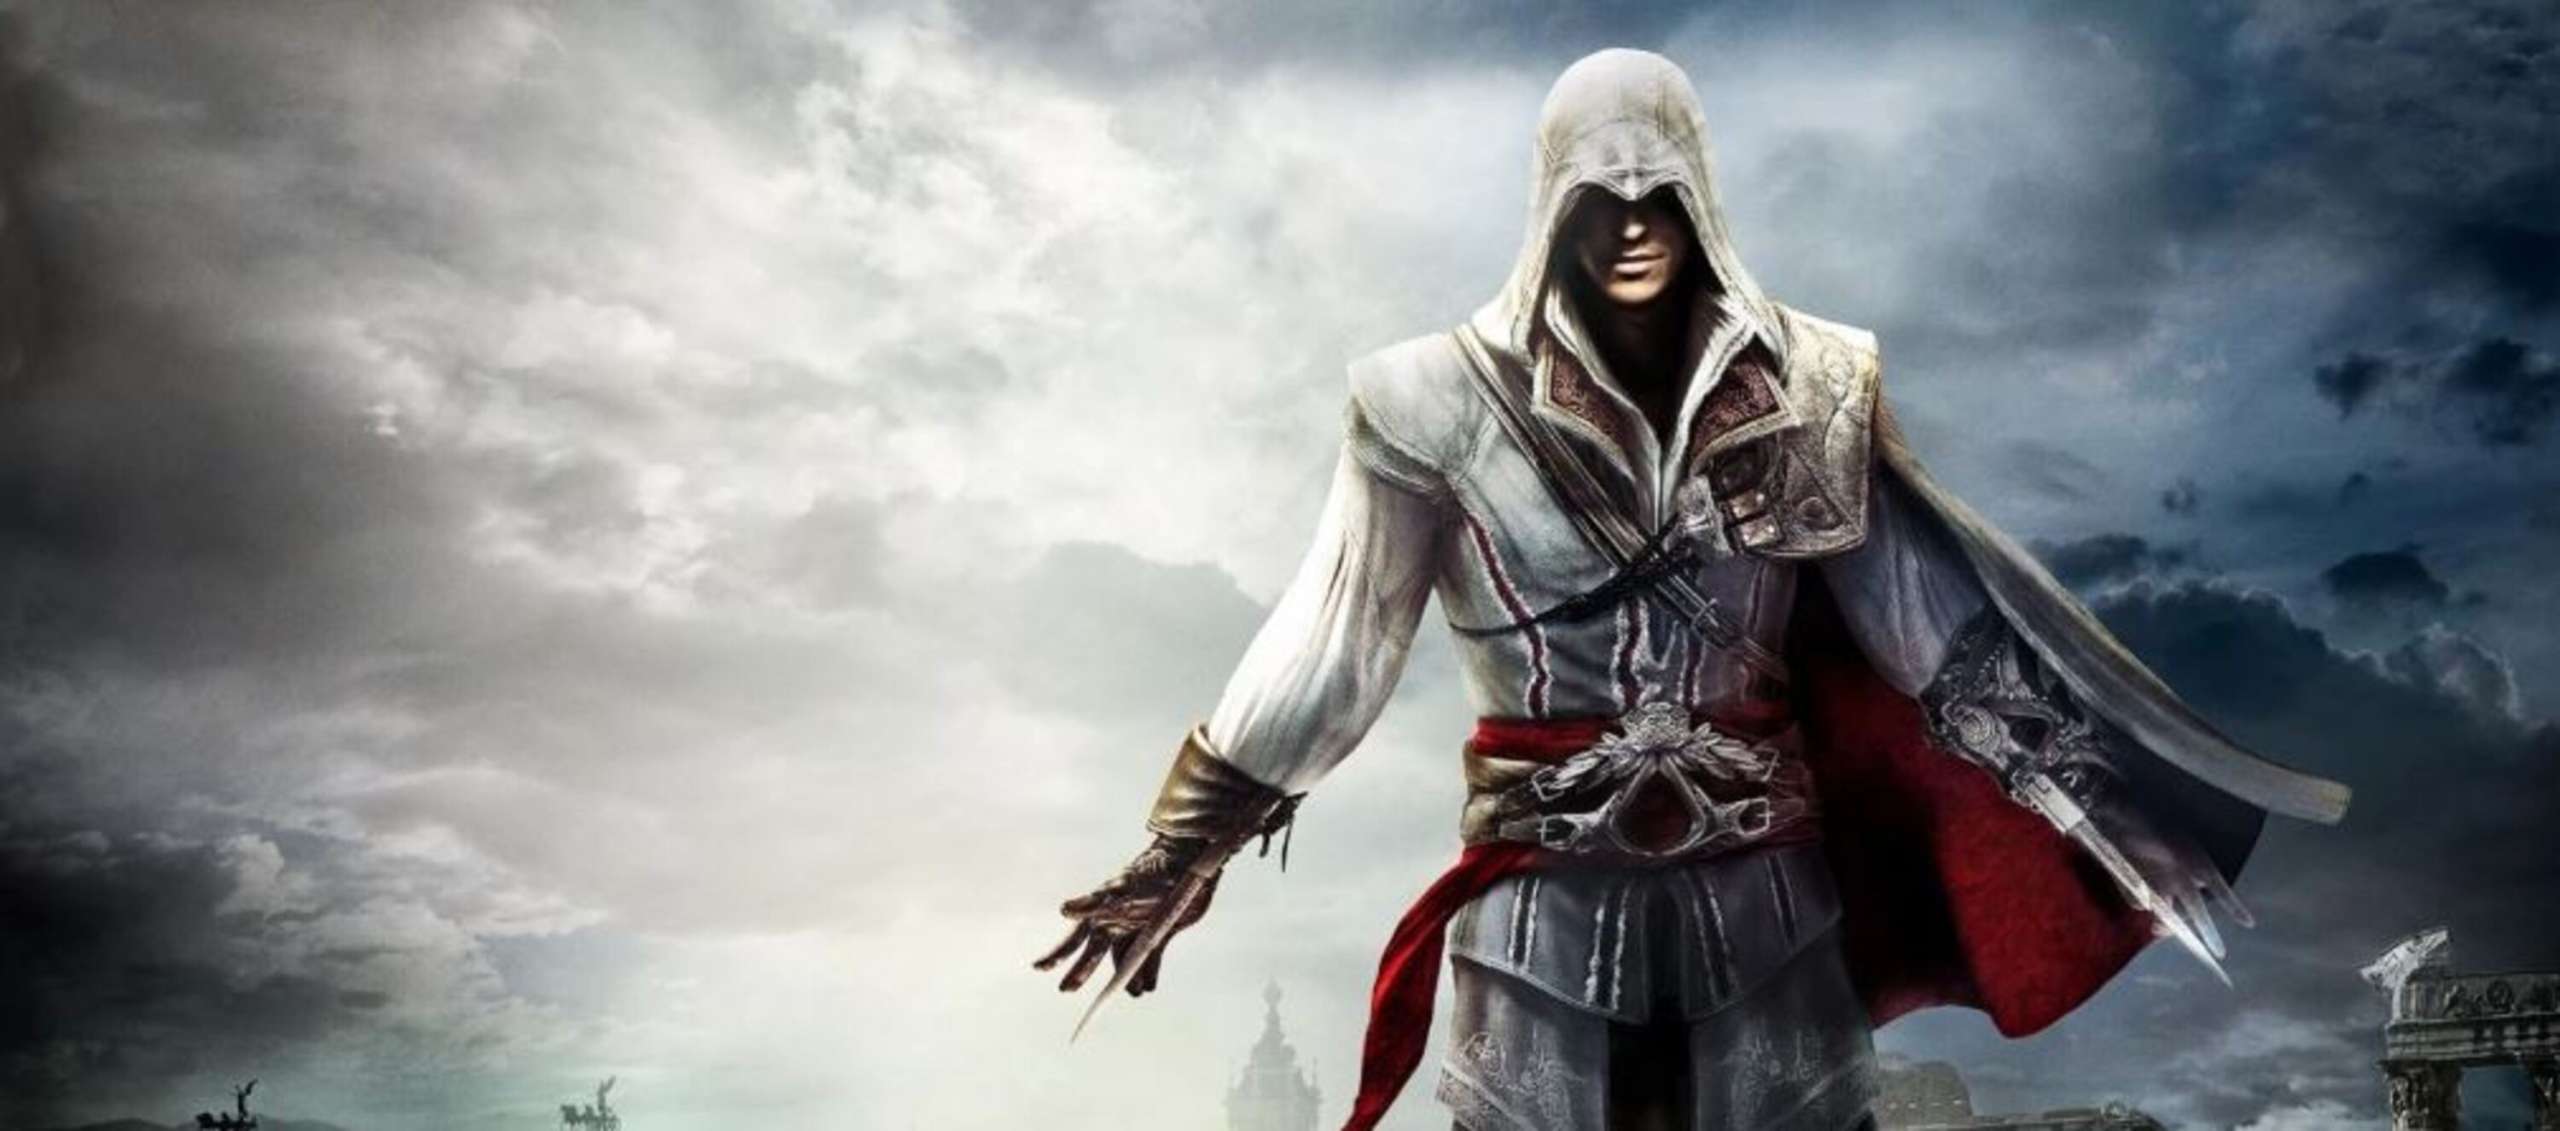 Assassin’s Creed Community’s 2022 Fundraising Campaign Will Provide Donations To The British Heart Foundation And The American Heart Association